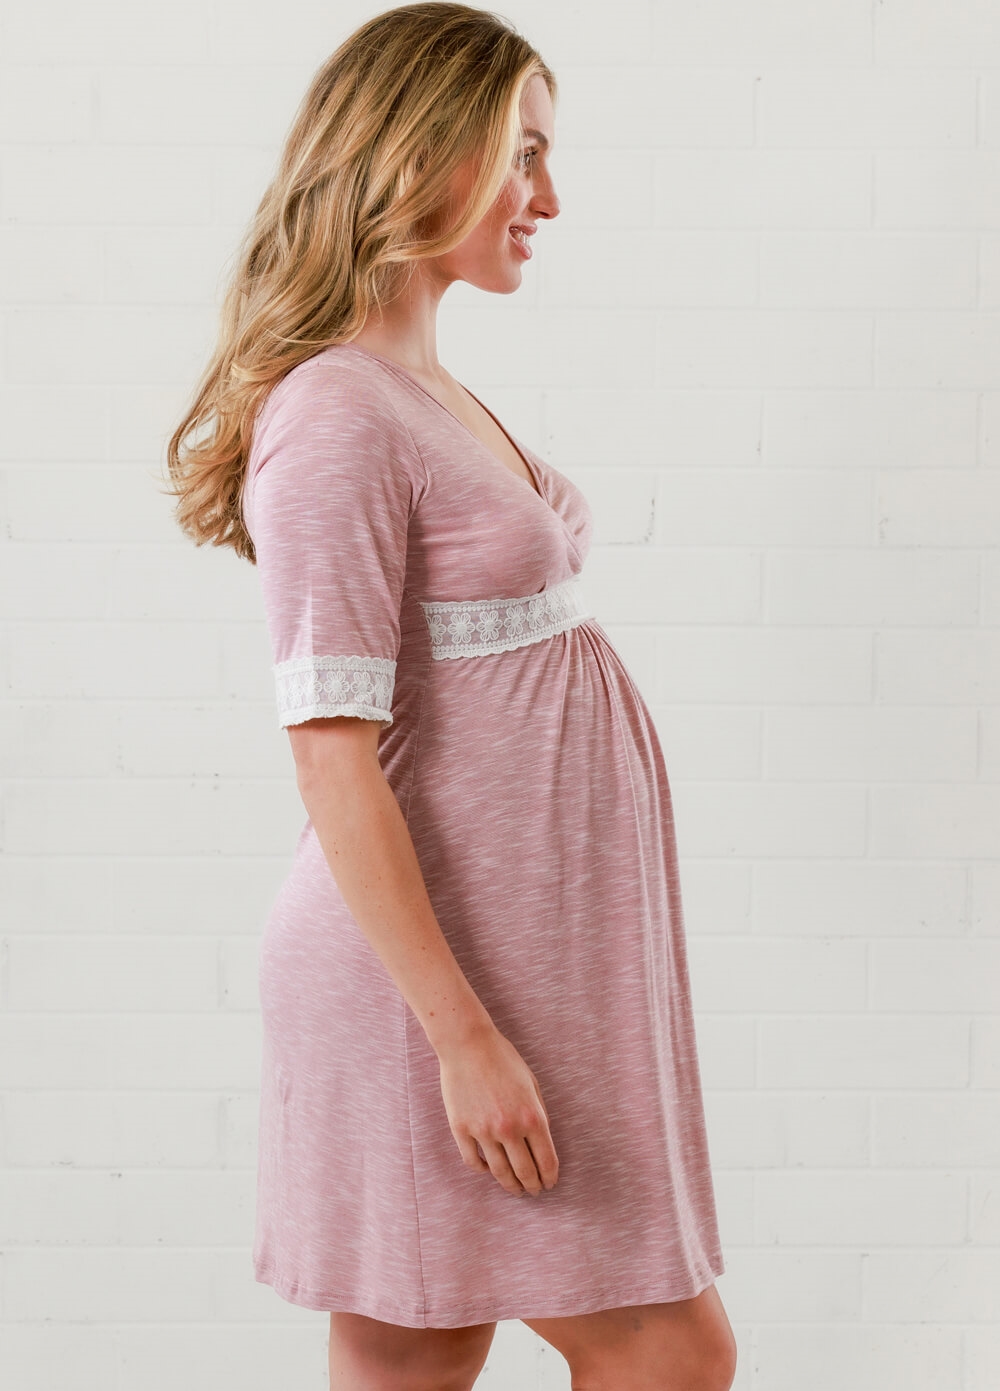 Lait & Co - Moselle Sleeved Maternity Nursing Nightdress in Pink